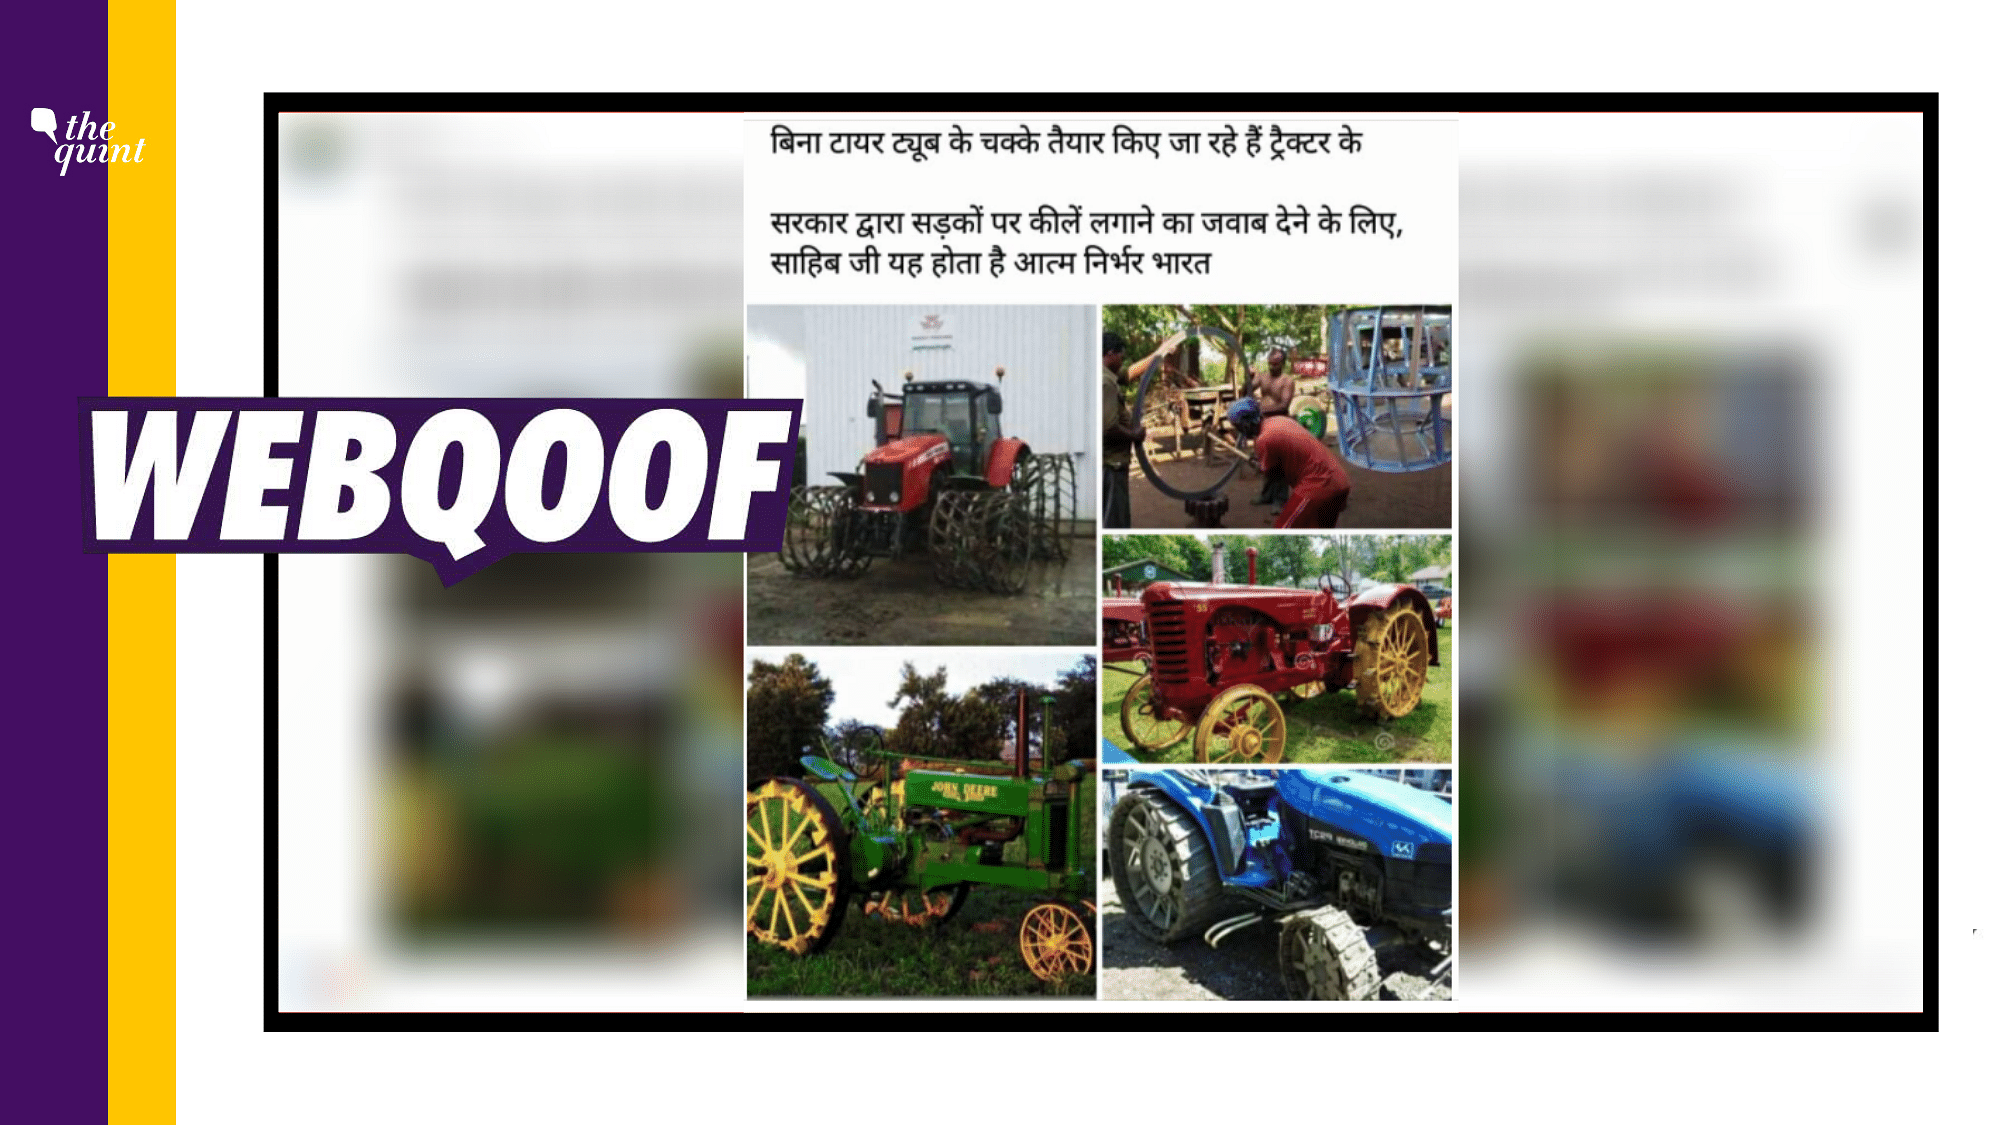 Old images of tractors, including stills and stock photos have been falsely linked to the ongoing farmers’ protest.